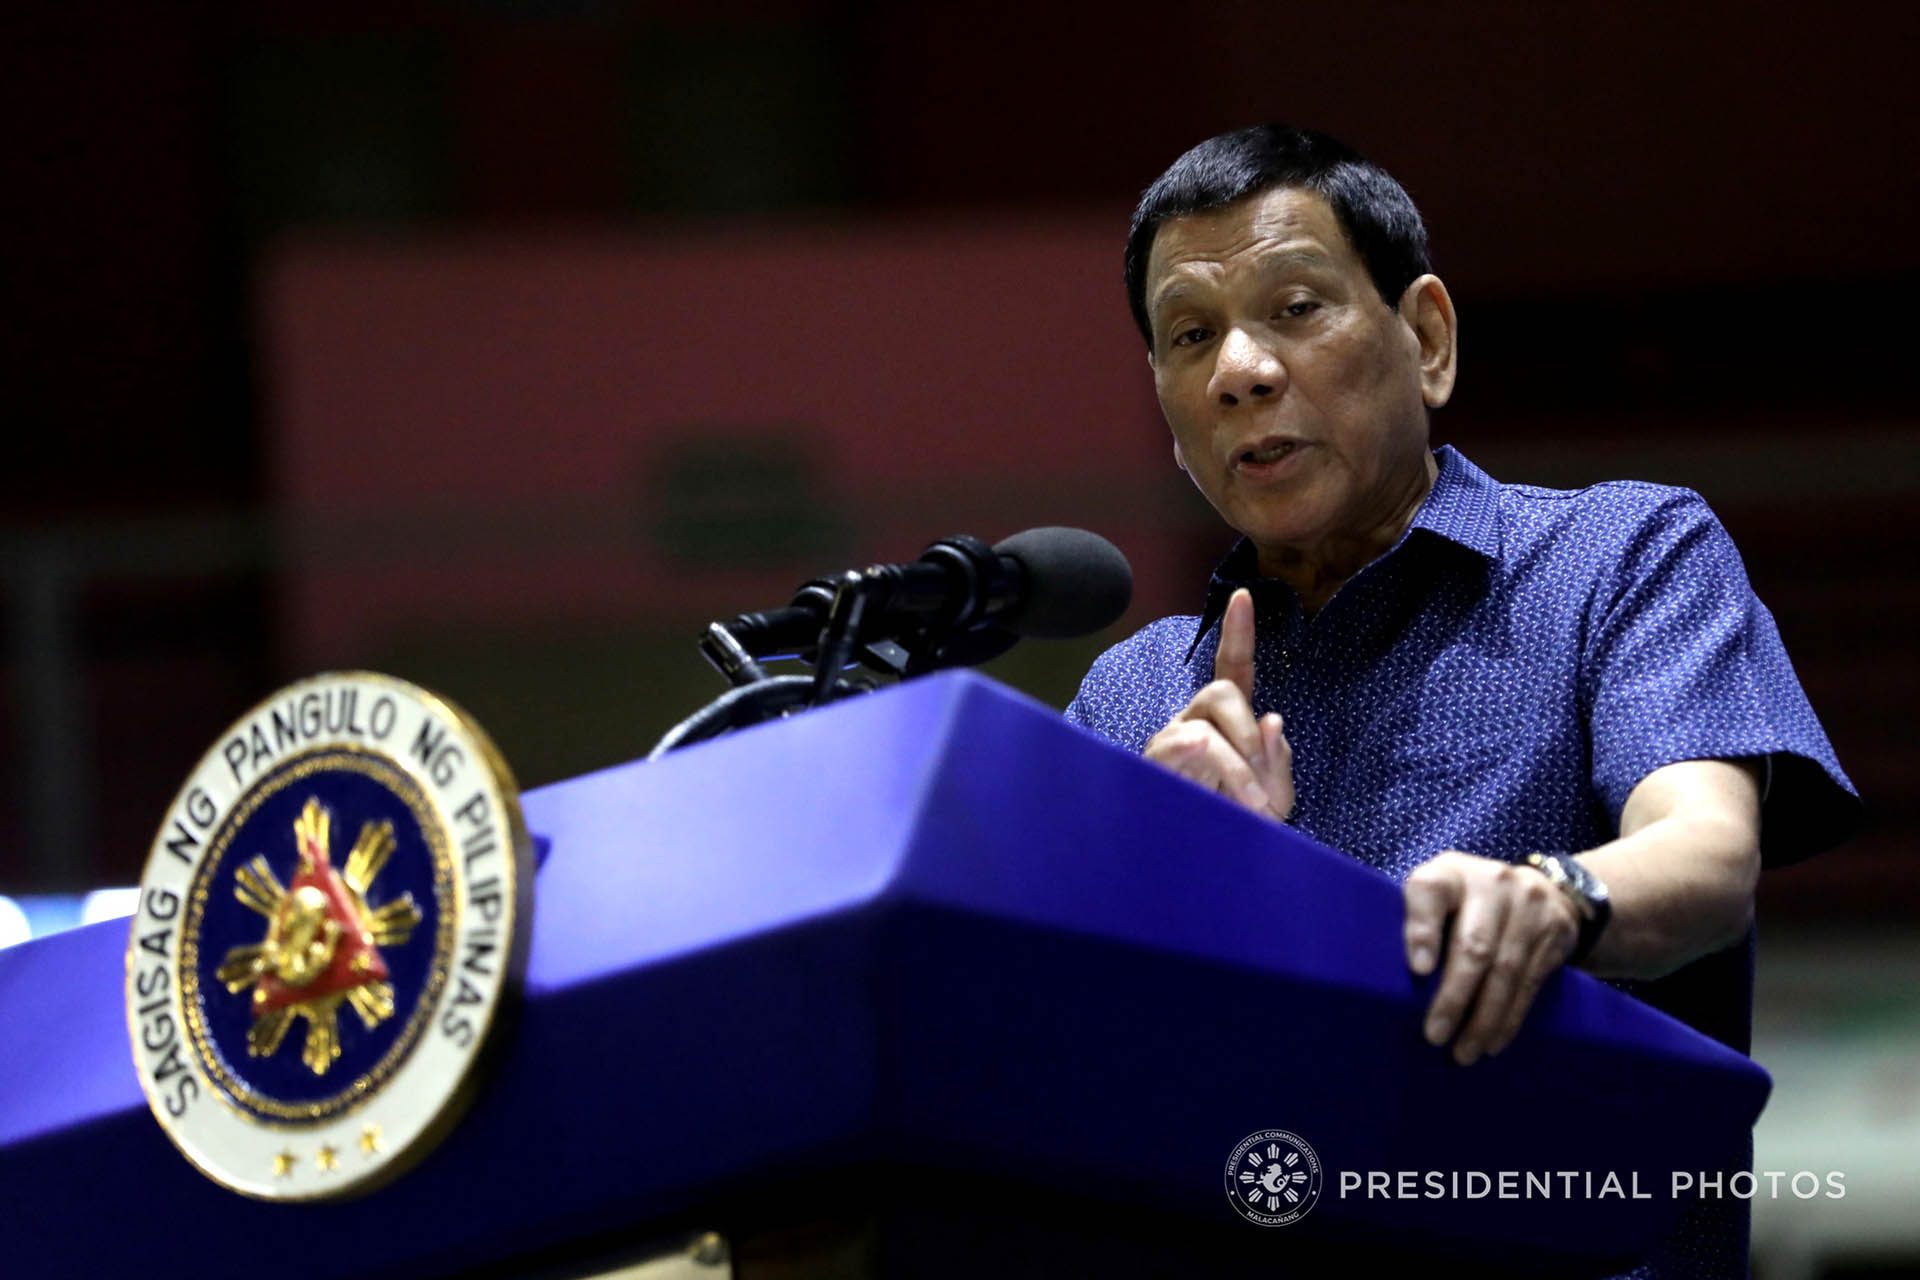 No one to blame but Duterte for PH failure to curb drugs – rights group